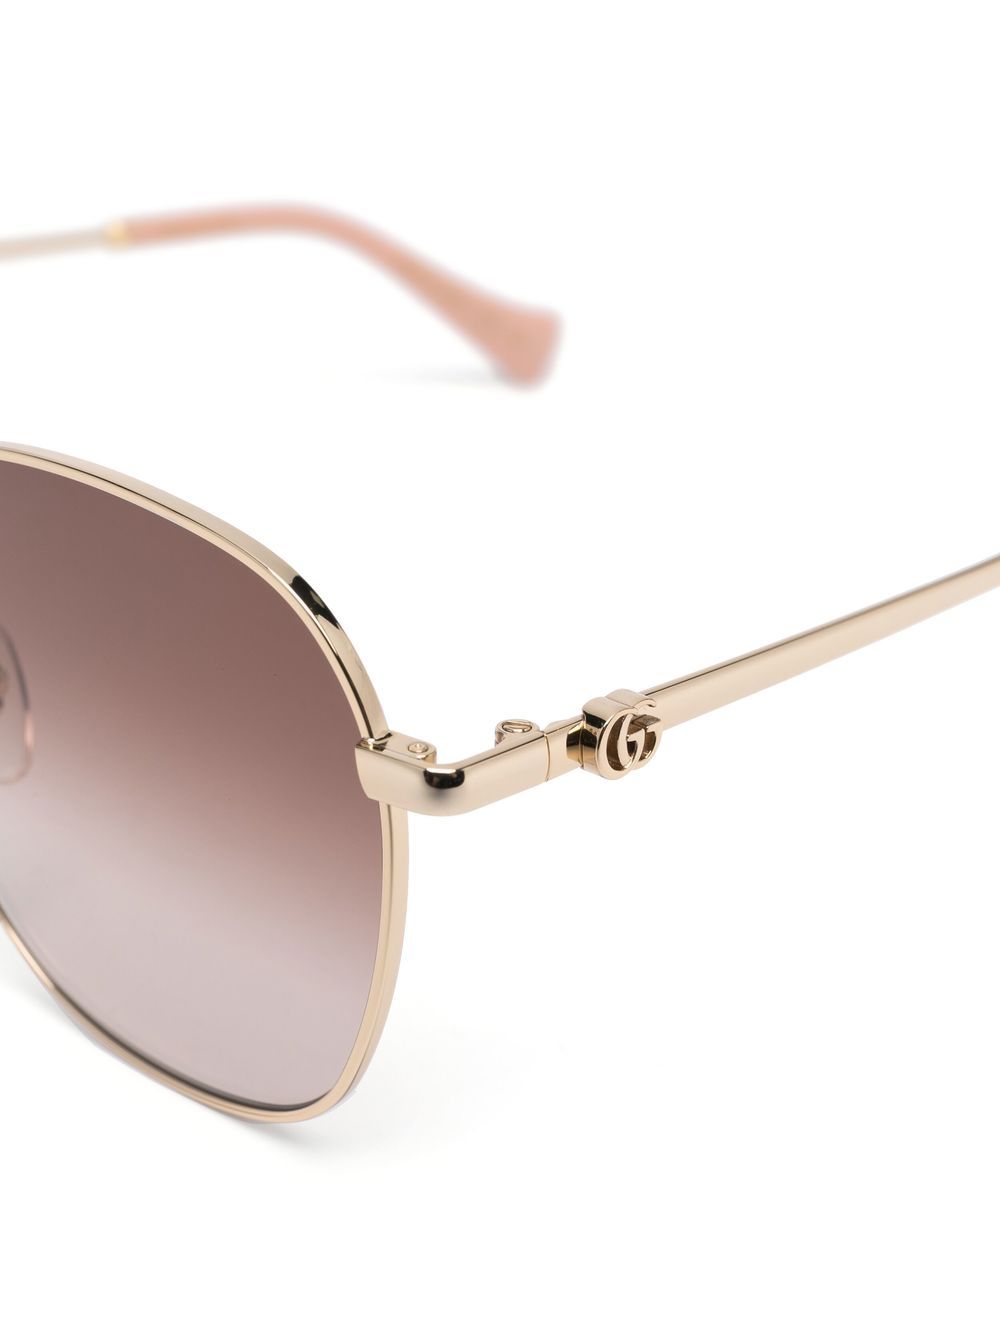 Gucci Low Nose Round Sunglasses Gold w/Brown Lens | Fashion Clinic